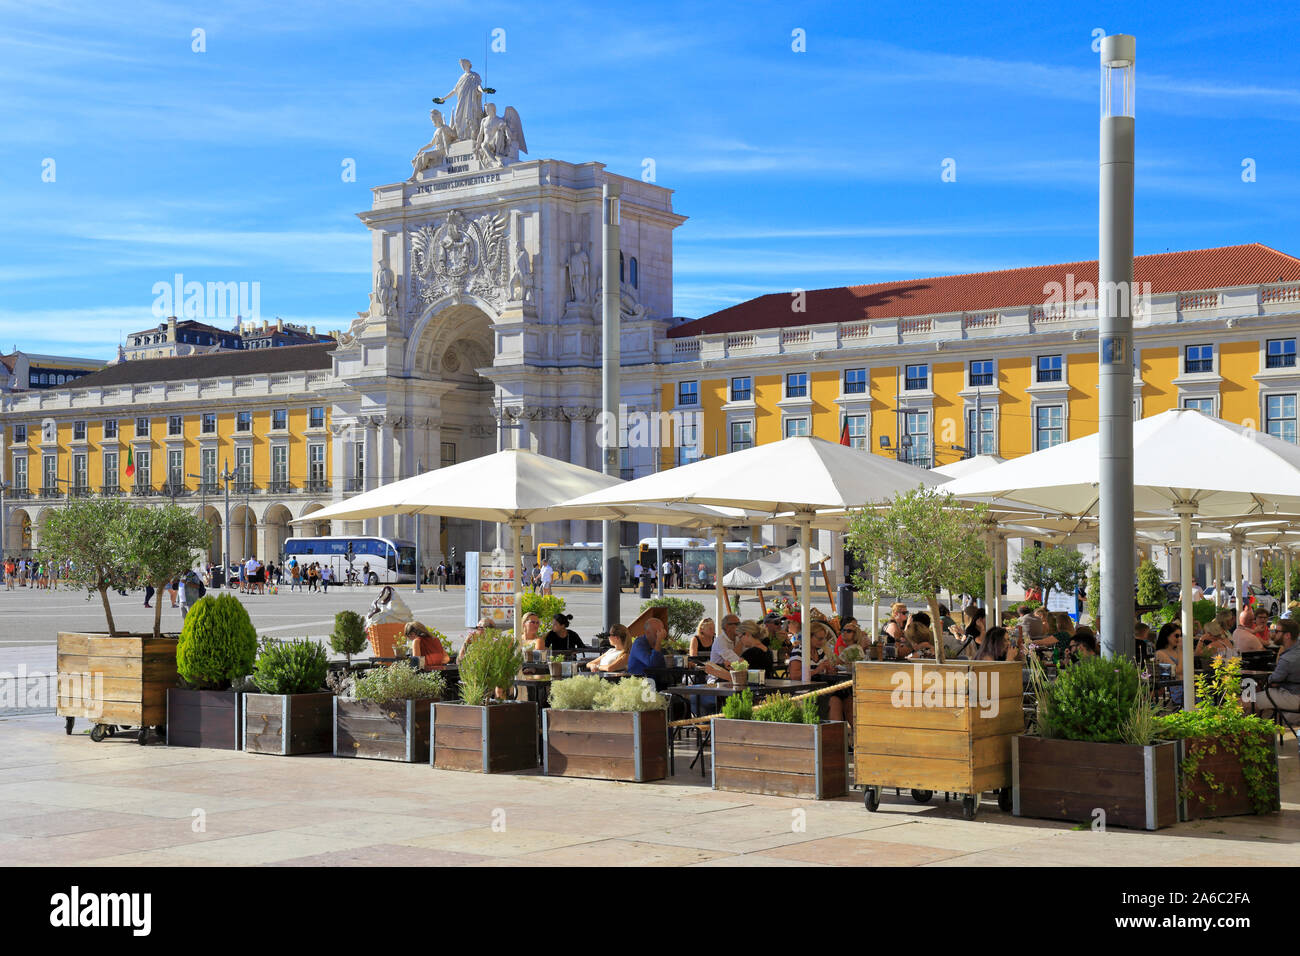 Diners at a restaurant in Parca do Comercio with Arco da Rua Augusta ornate triumphal arch in the background, Lisbon, Portugal. Stock Photo